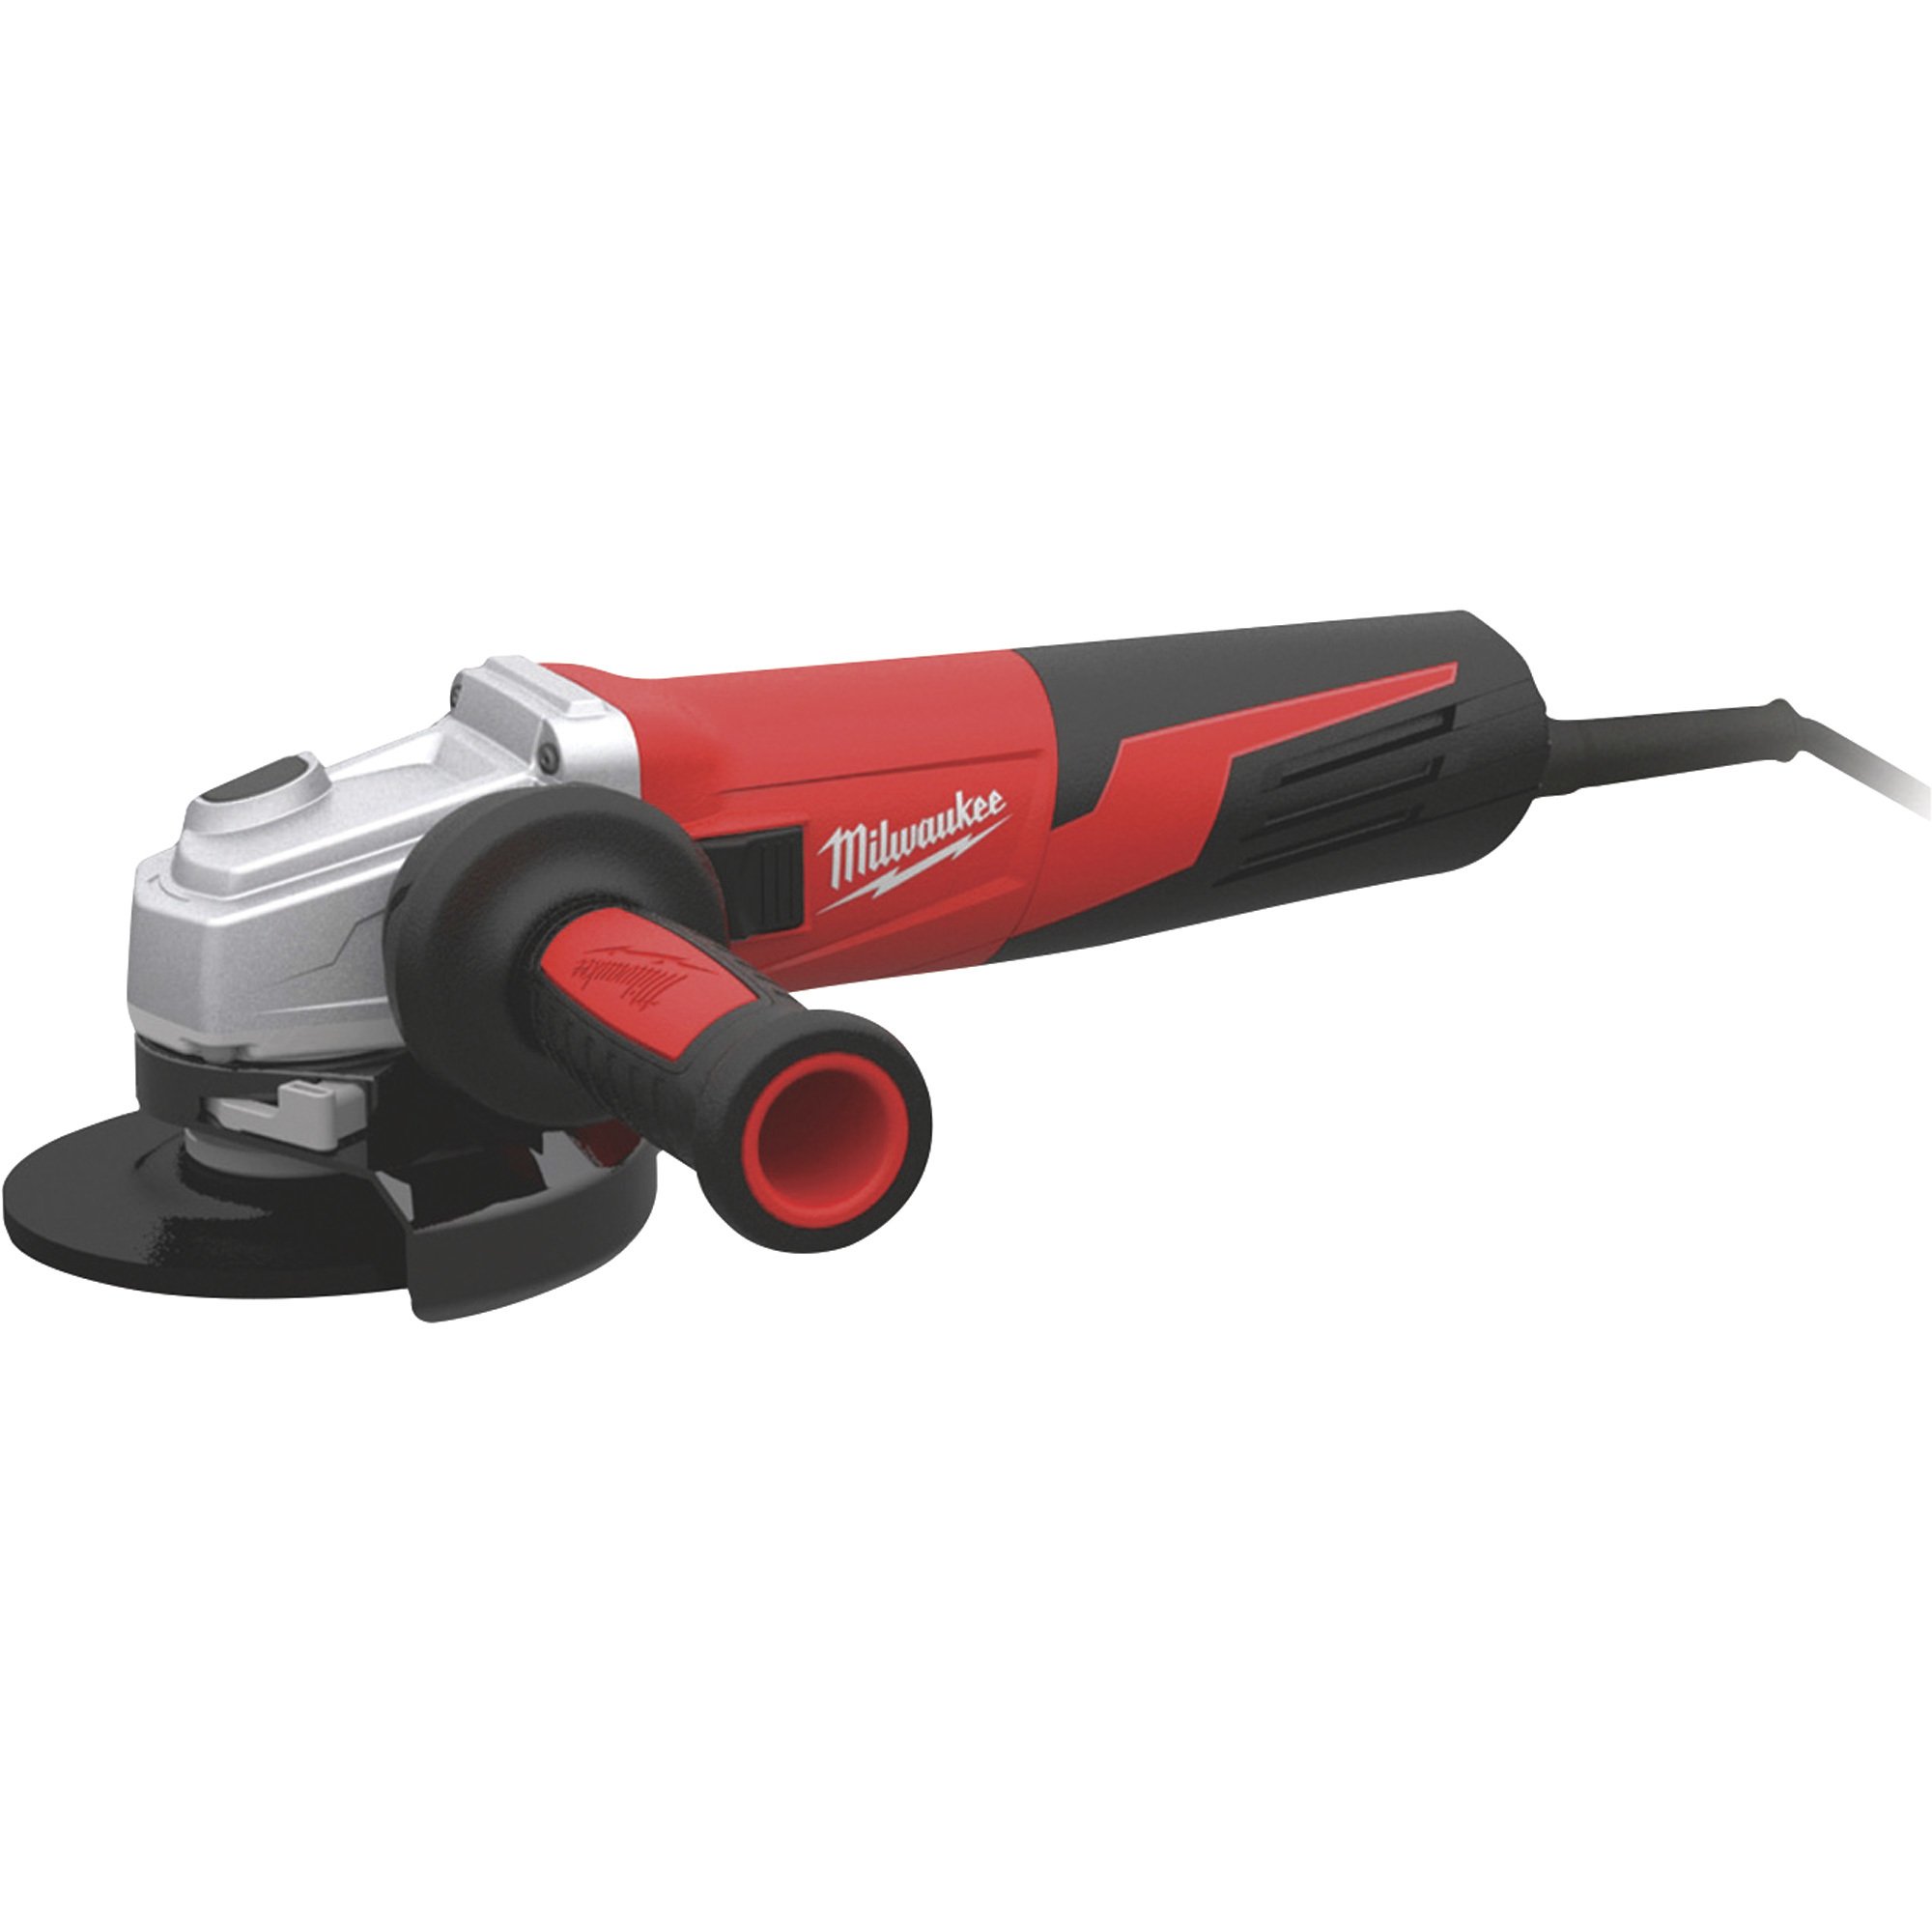 Milwaukee 6in. Grinder — 13 Amp, 9000 RPM, Side Handle, Slide Switch,  Clutch, Model# 6161-33 Northern Tool